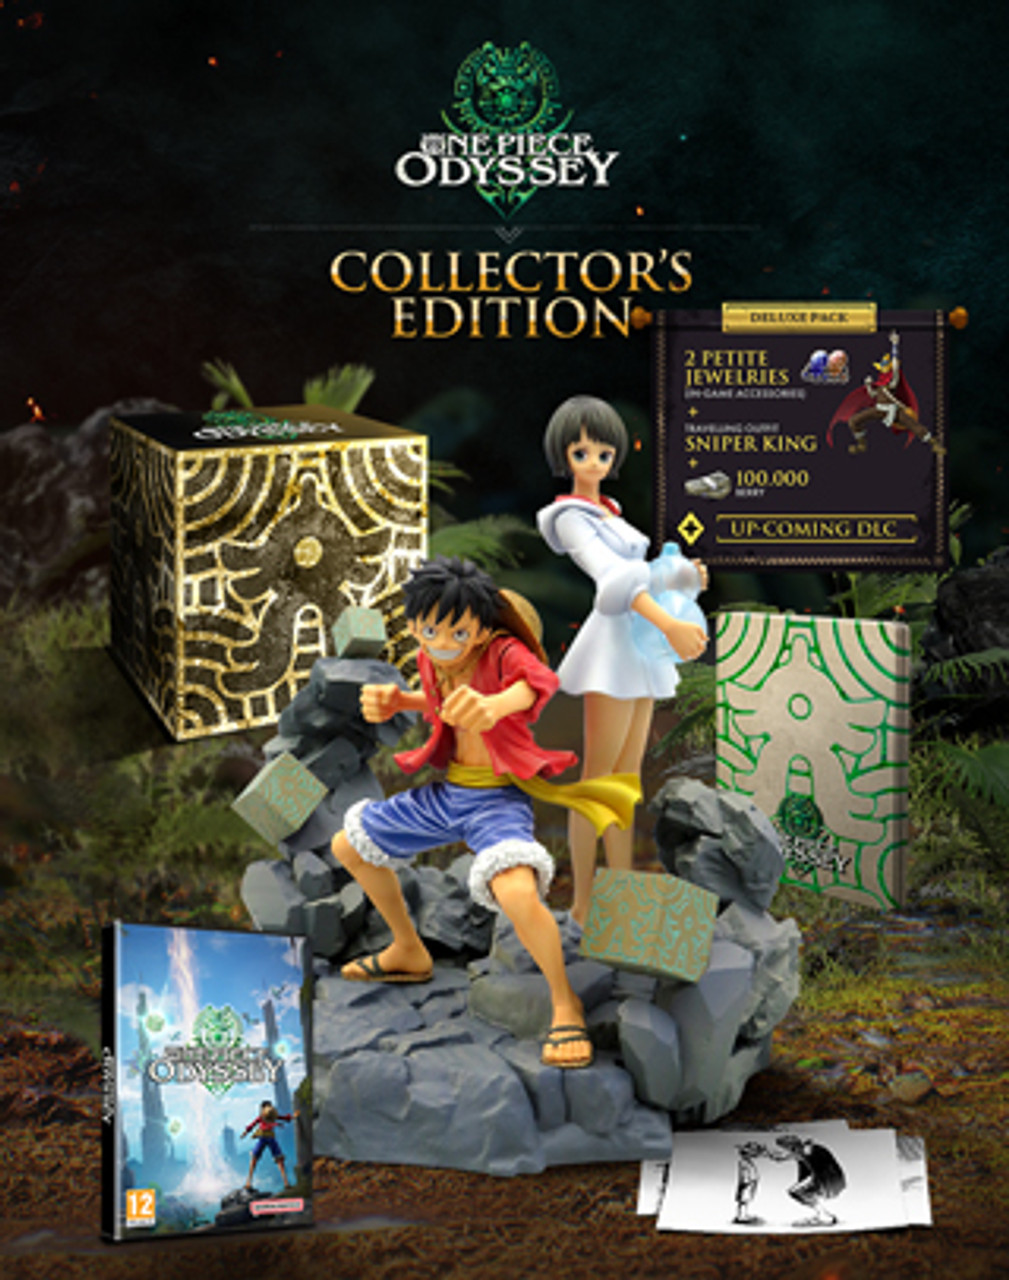 ONE PIECE ODYSSEY Physical Full Game [PC] - COLLECTOR'S EDITION